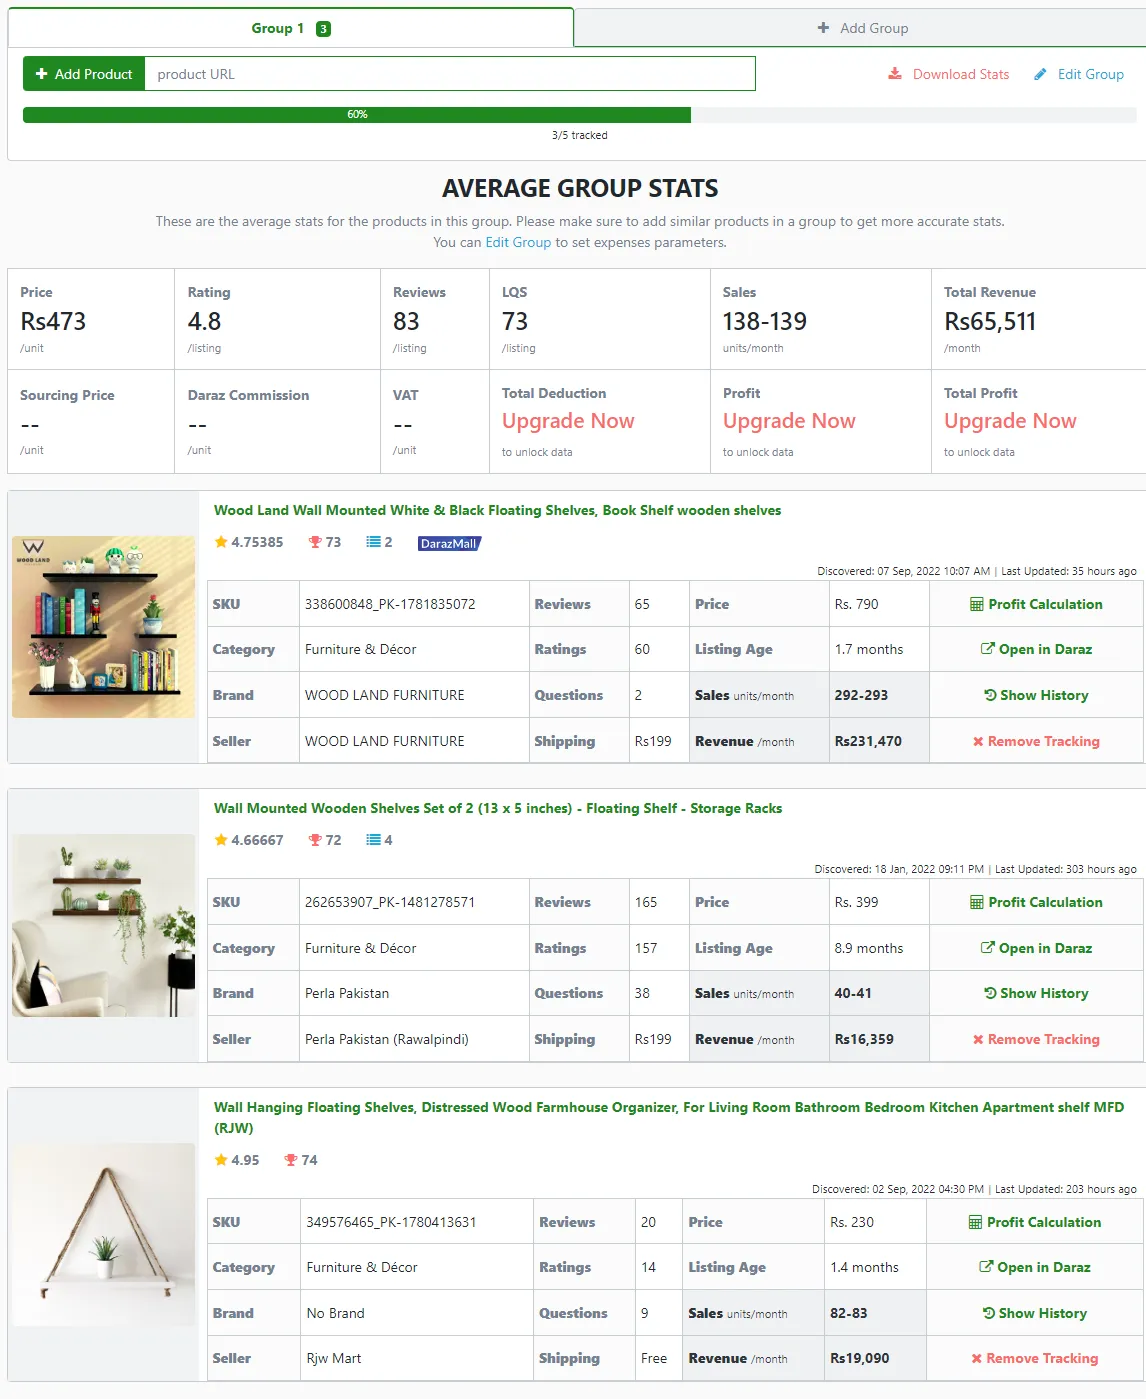 The Product Tracker is used to track Daraz products added in a group, for a specific time period to analyze performance metrics like Sales, Reviews, Listing Age, etc.